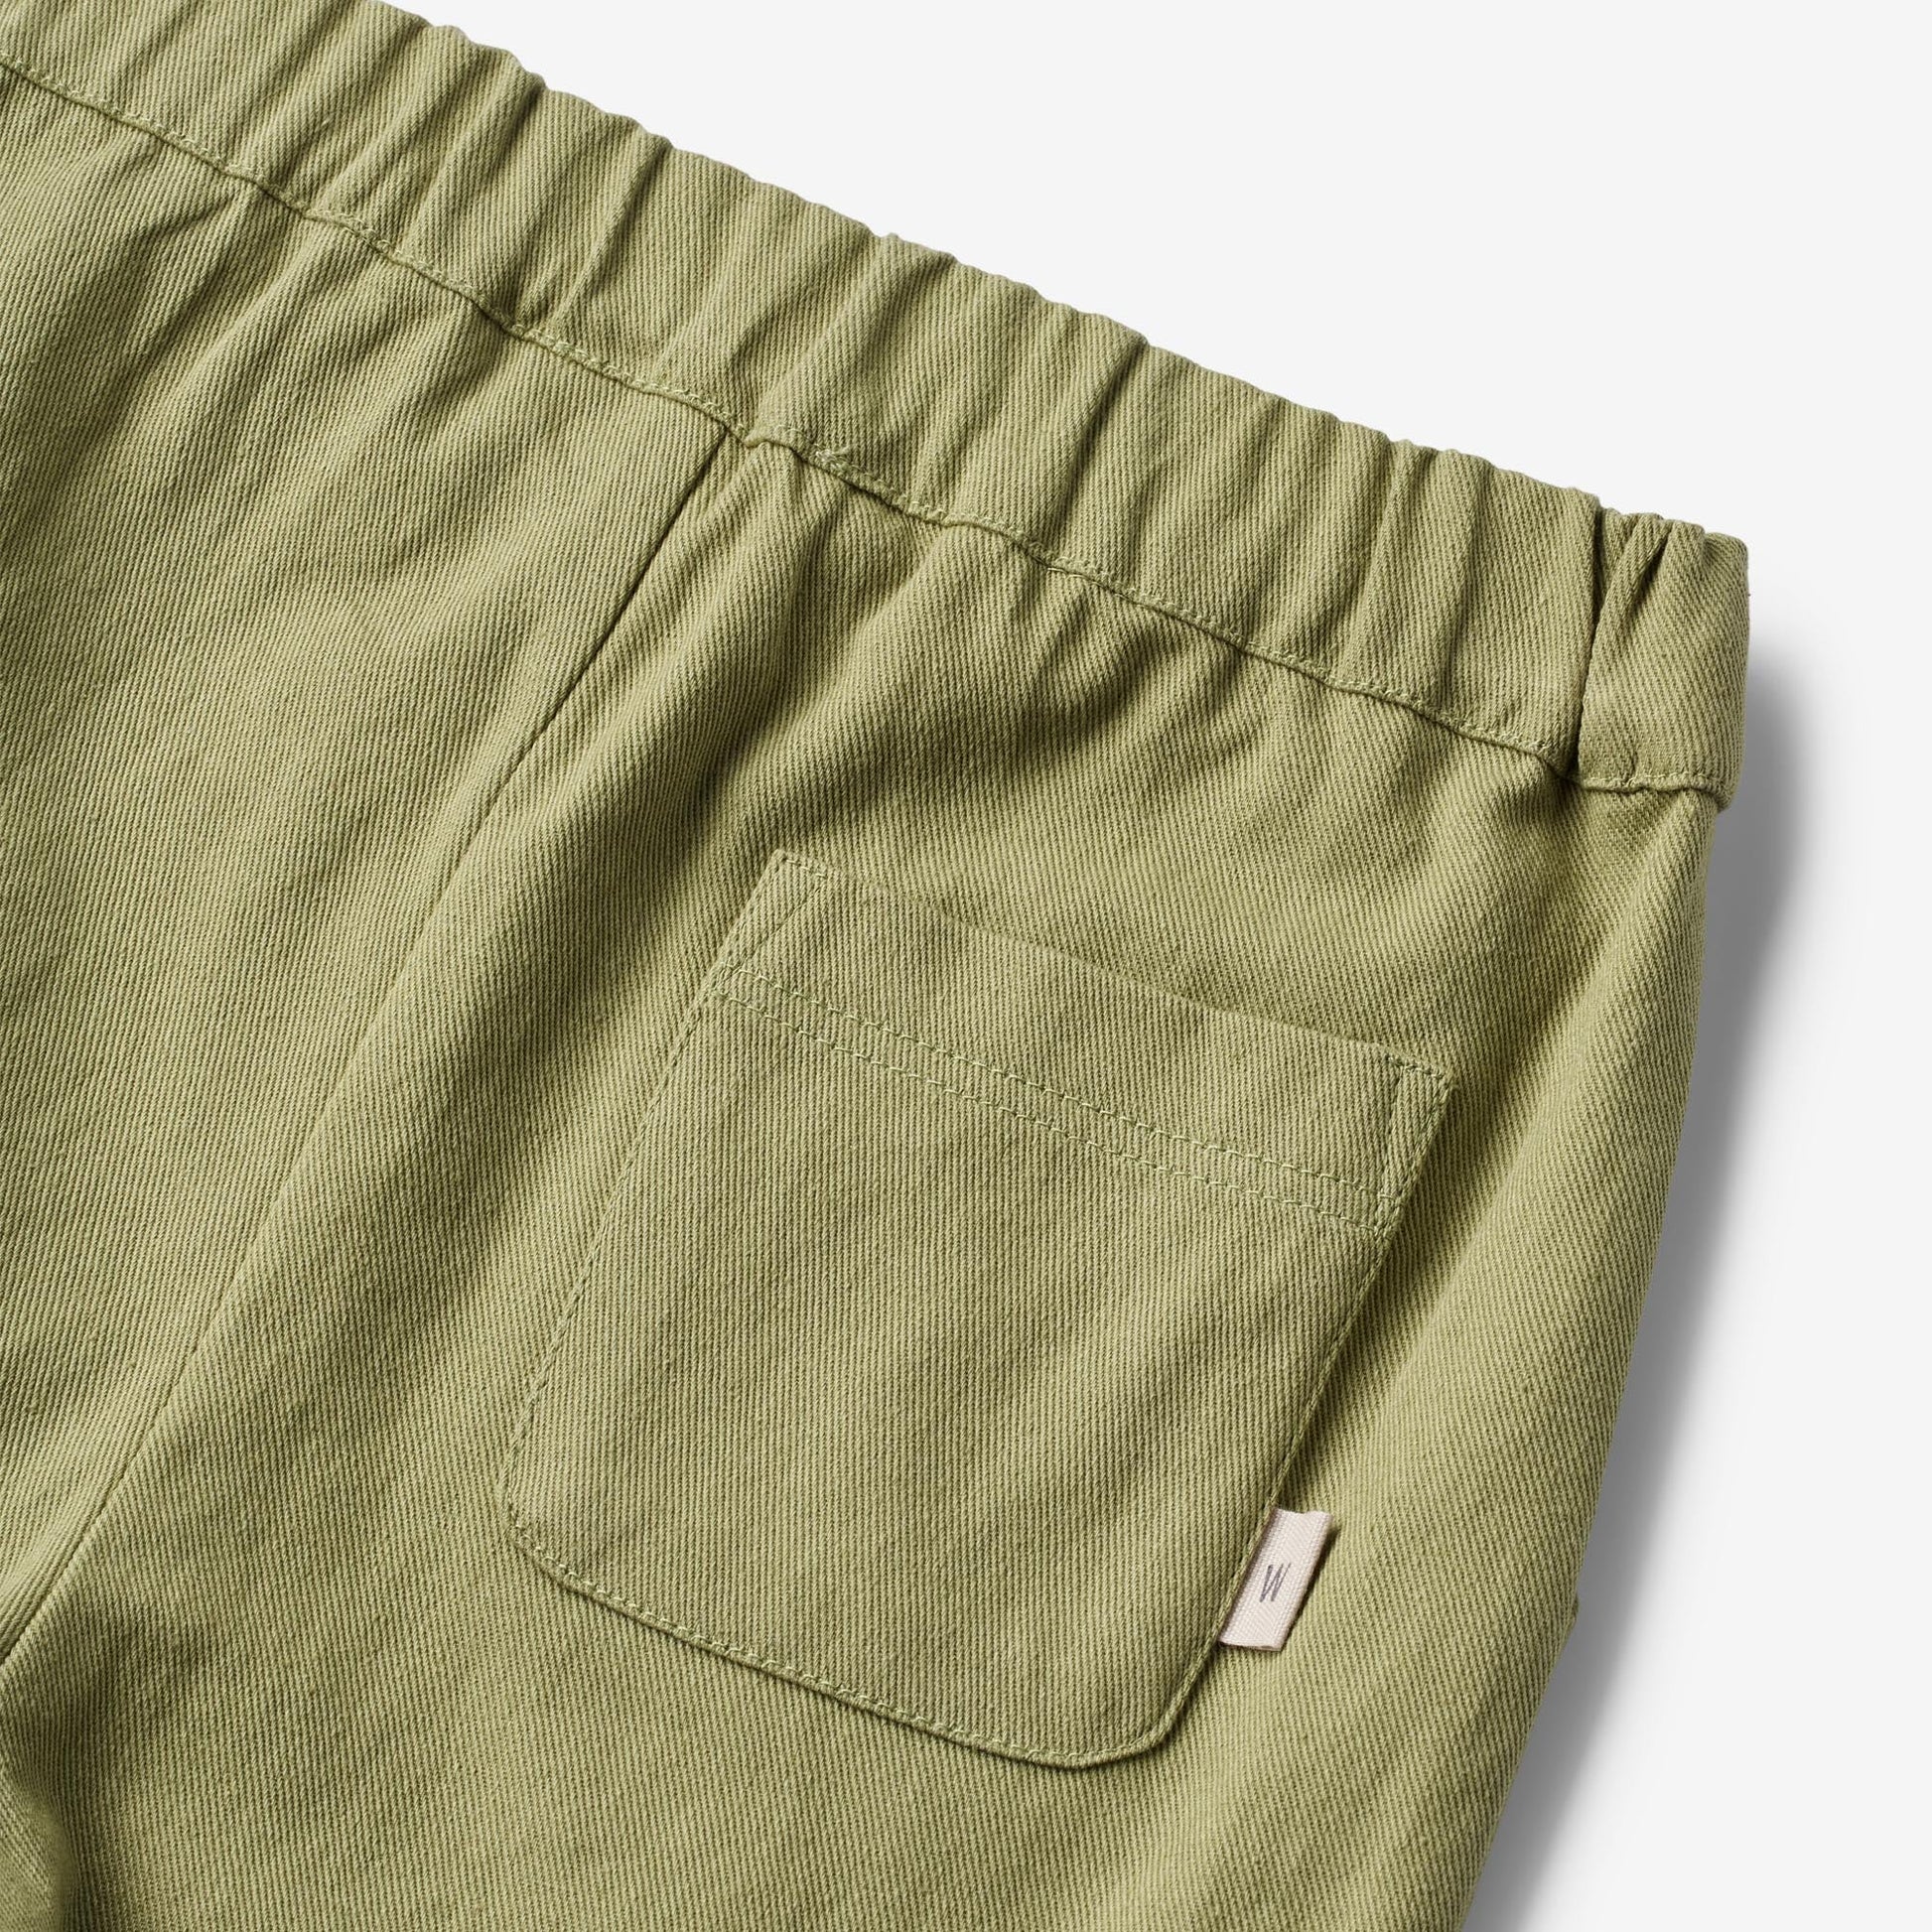 Wheat 'Andy' Baby Trousers - Sage